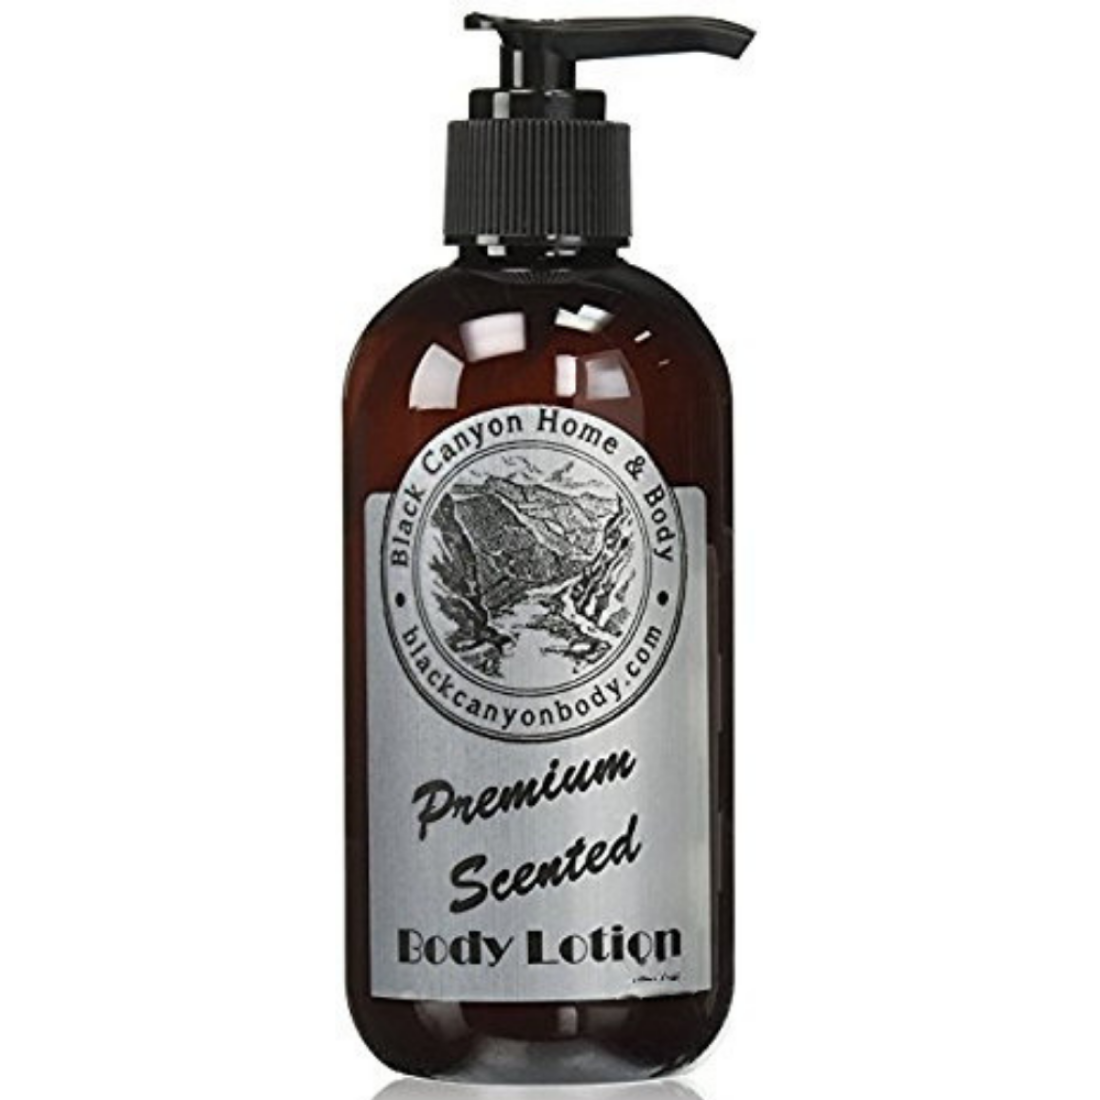 Black Canyon Lily & Peach Scented Luxury Body Lotion with Lanolin and Jojoba Oil